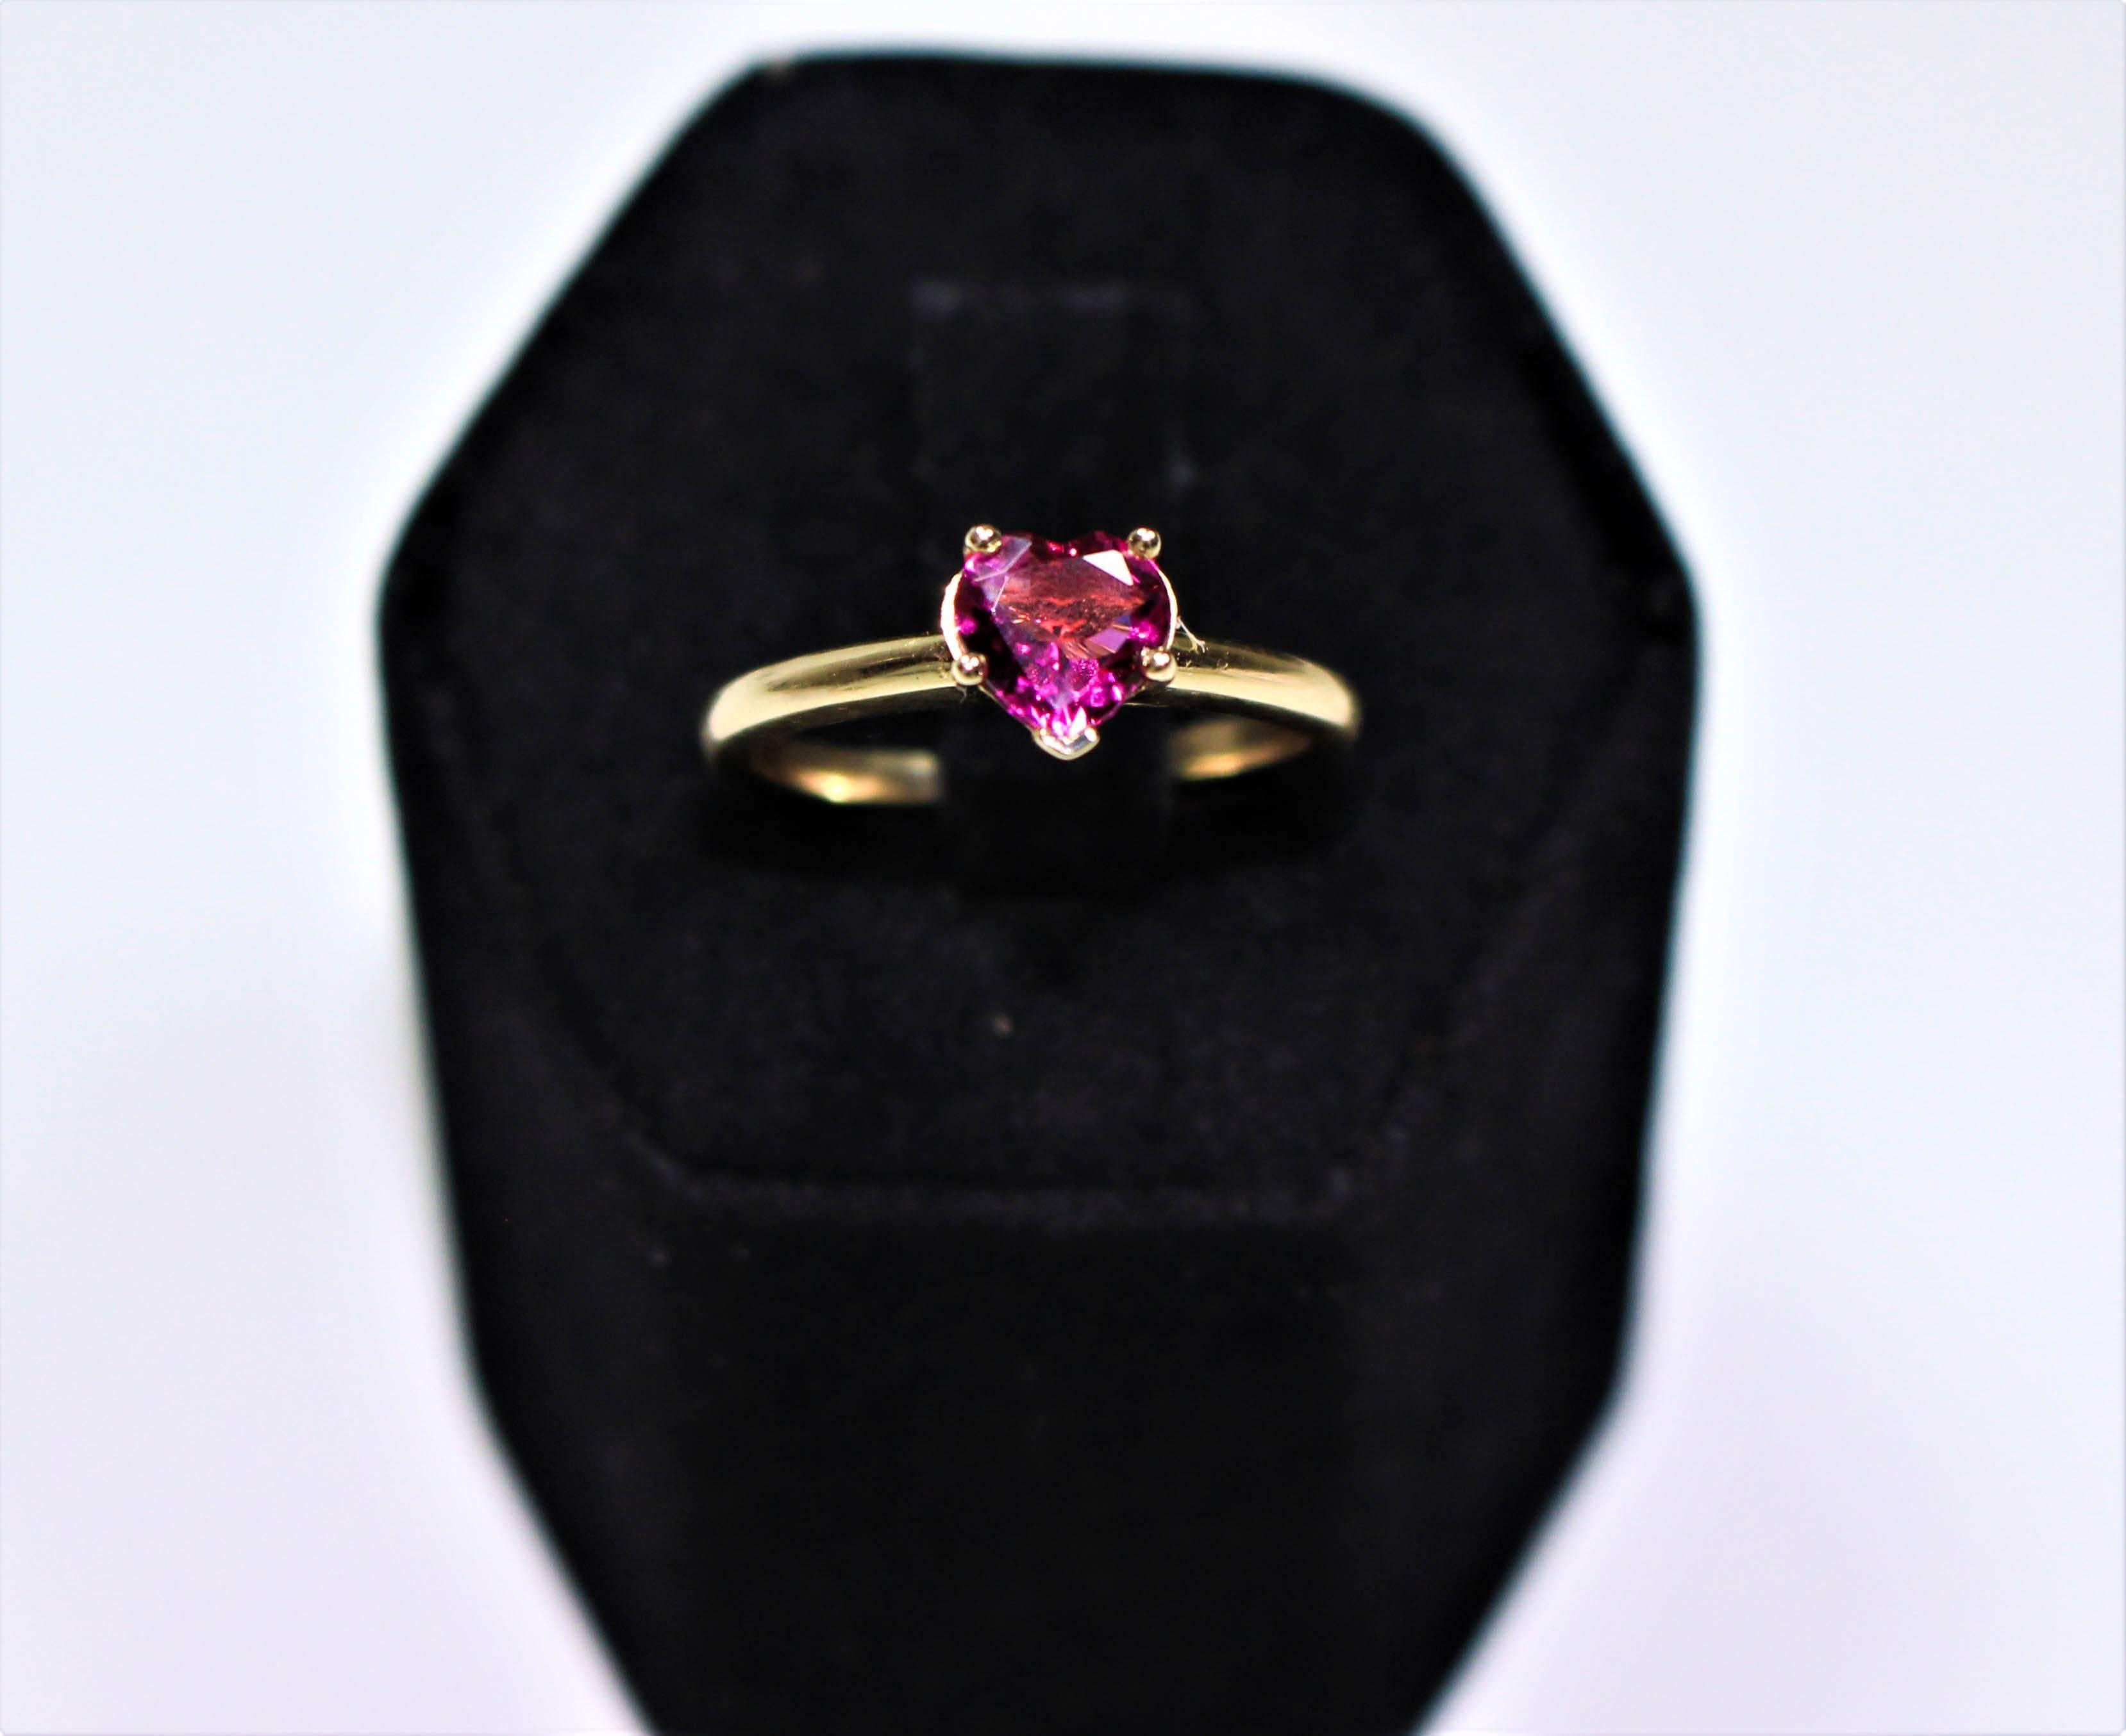 This ring is composed of 14KT yellow gold with a heart cut pink tourmaline .71 ct.
 A beautiful and classic style that is the perfect gift. 
RING Size 5.5 which is easily sizable.

Please feel free to ask any questions you may have, we are happy to